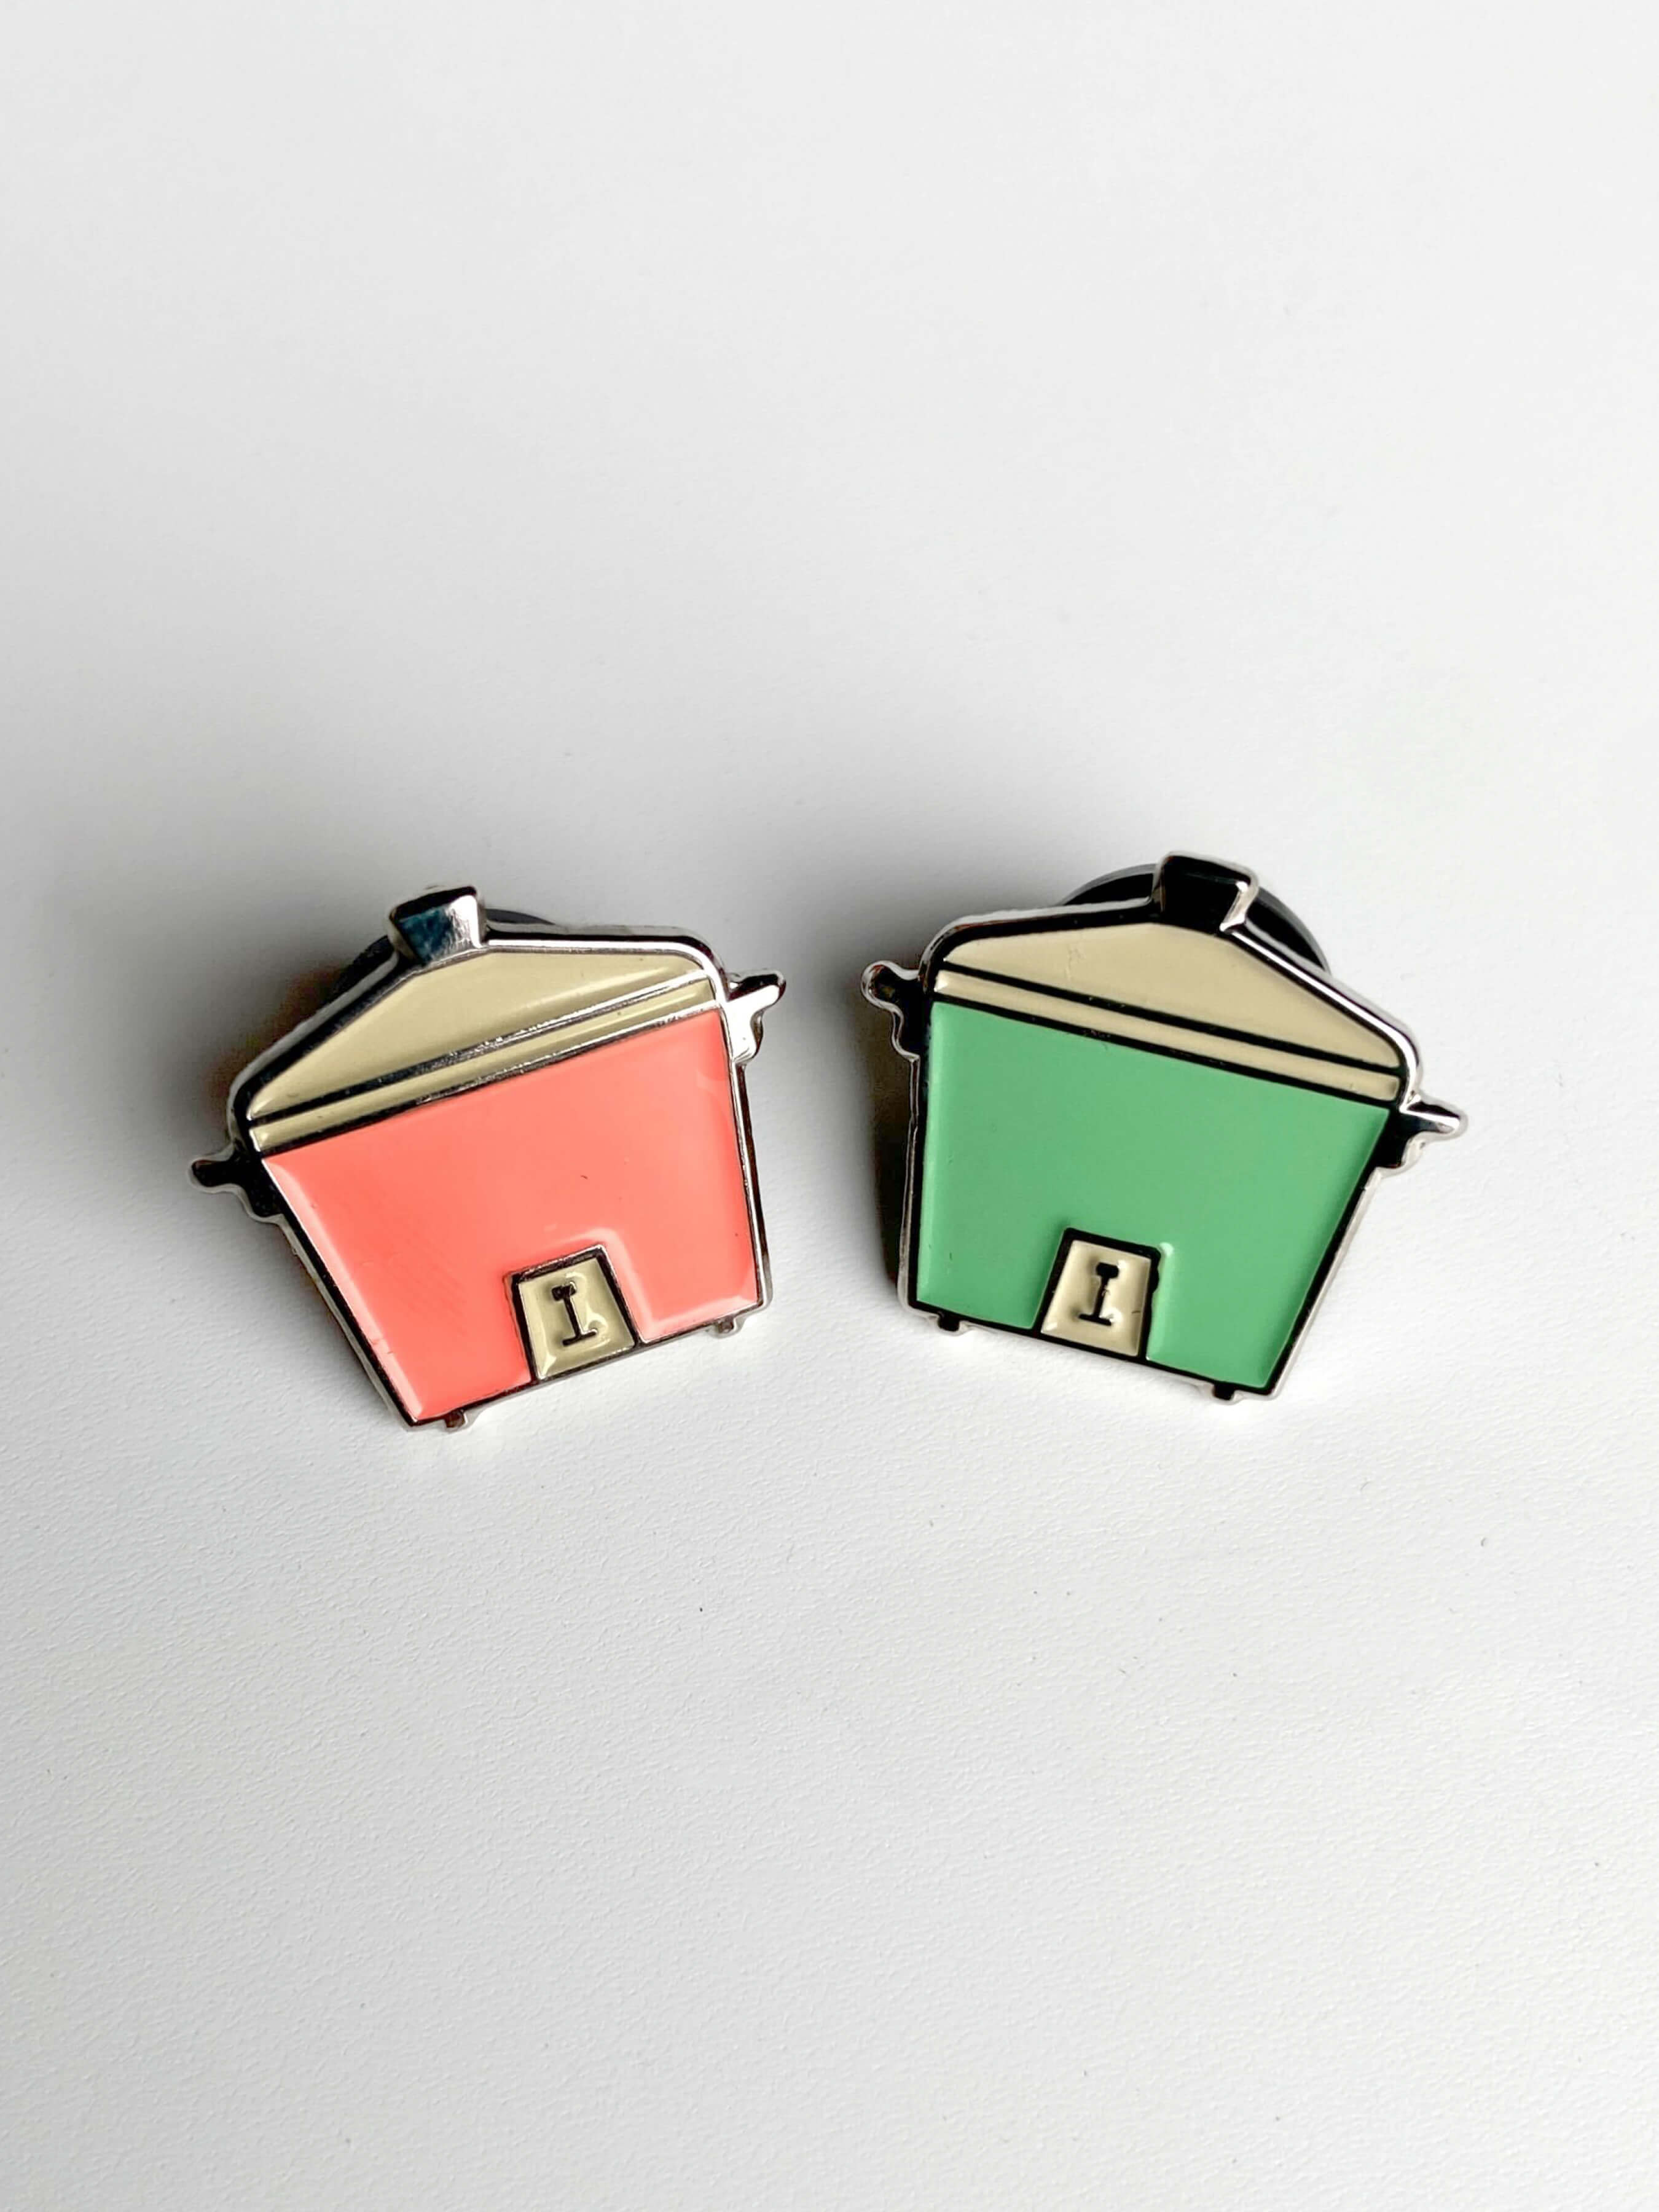 Tatung Rice Cooker Enamel Pins, Green and Red